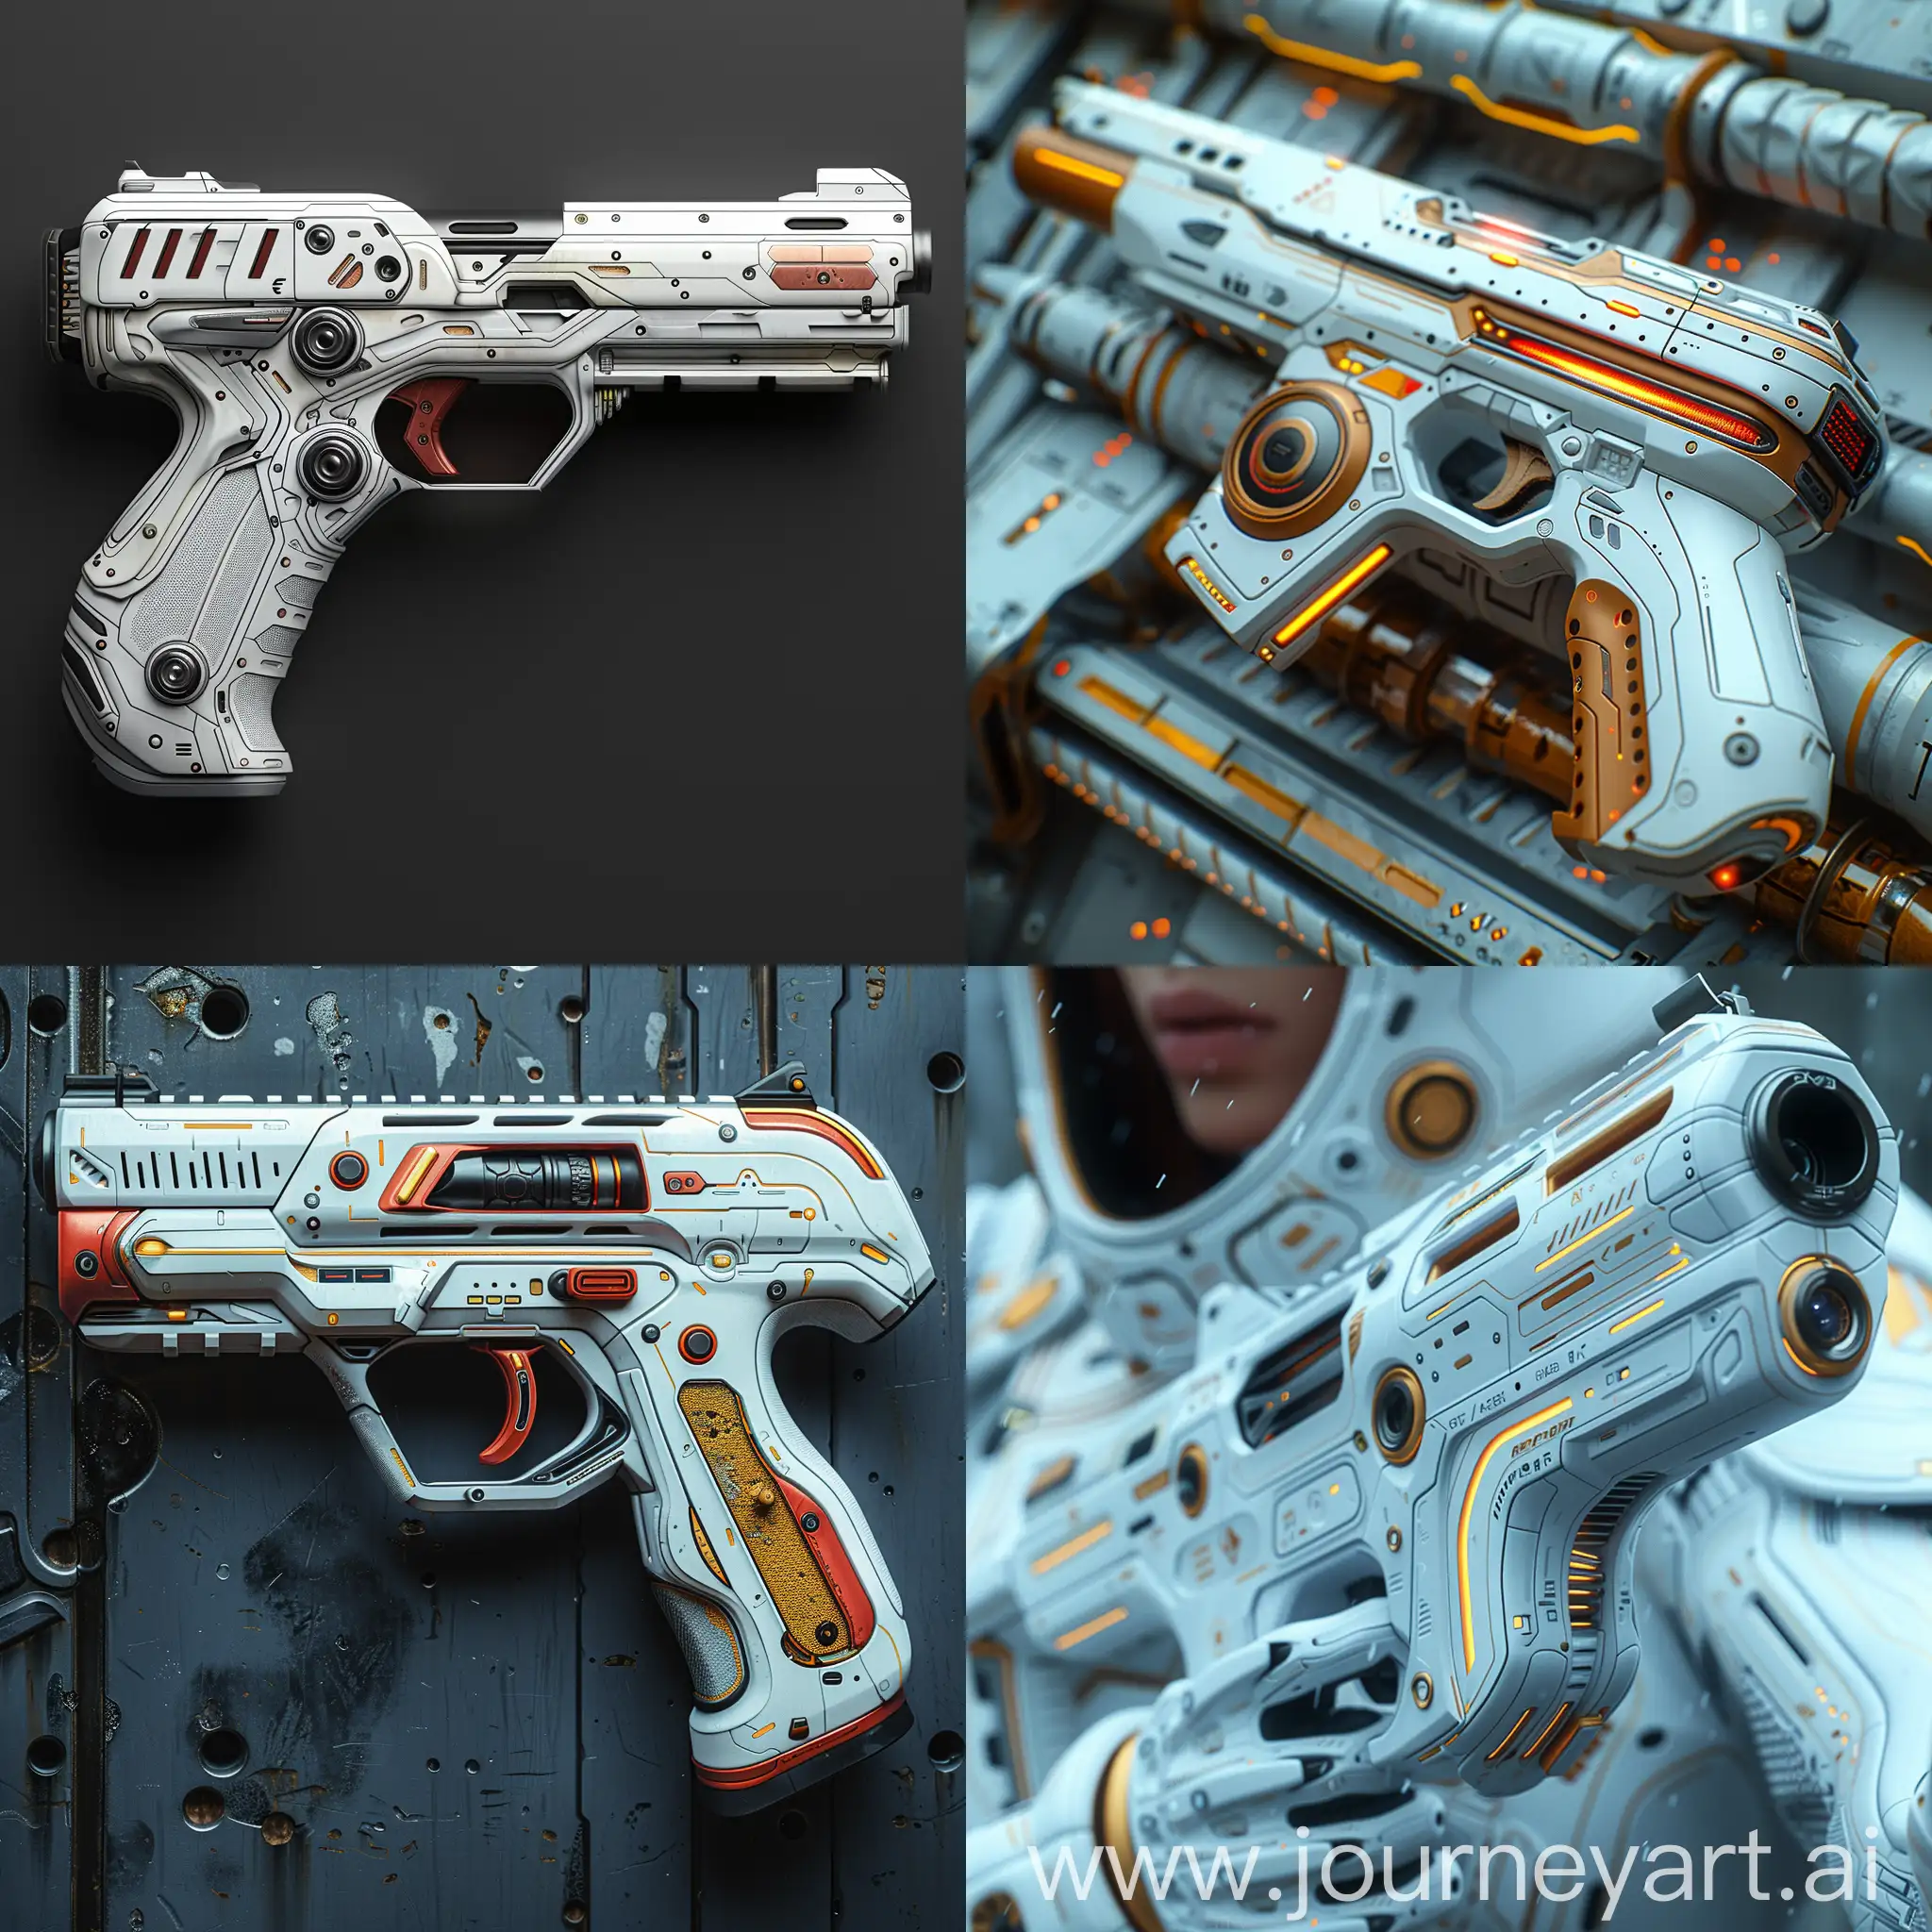 Futuristic-Plasma-Pistol-2077-Smart-Weapon-with-Compact-and-Lethal-Modular-Design